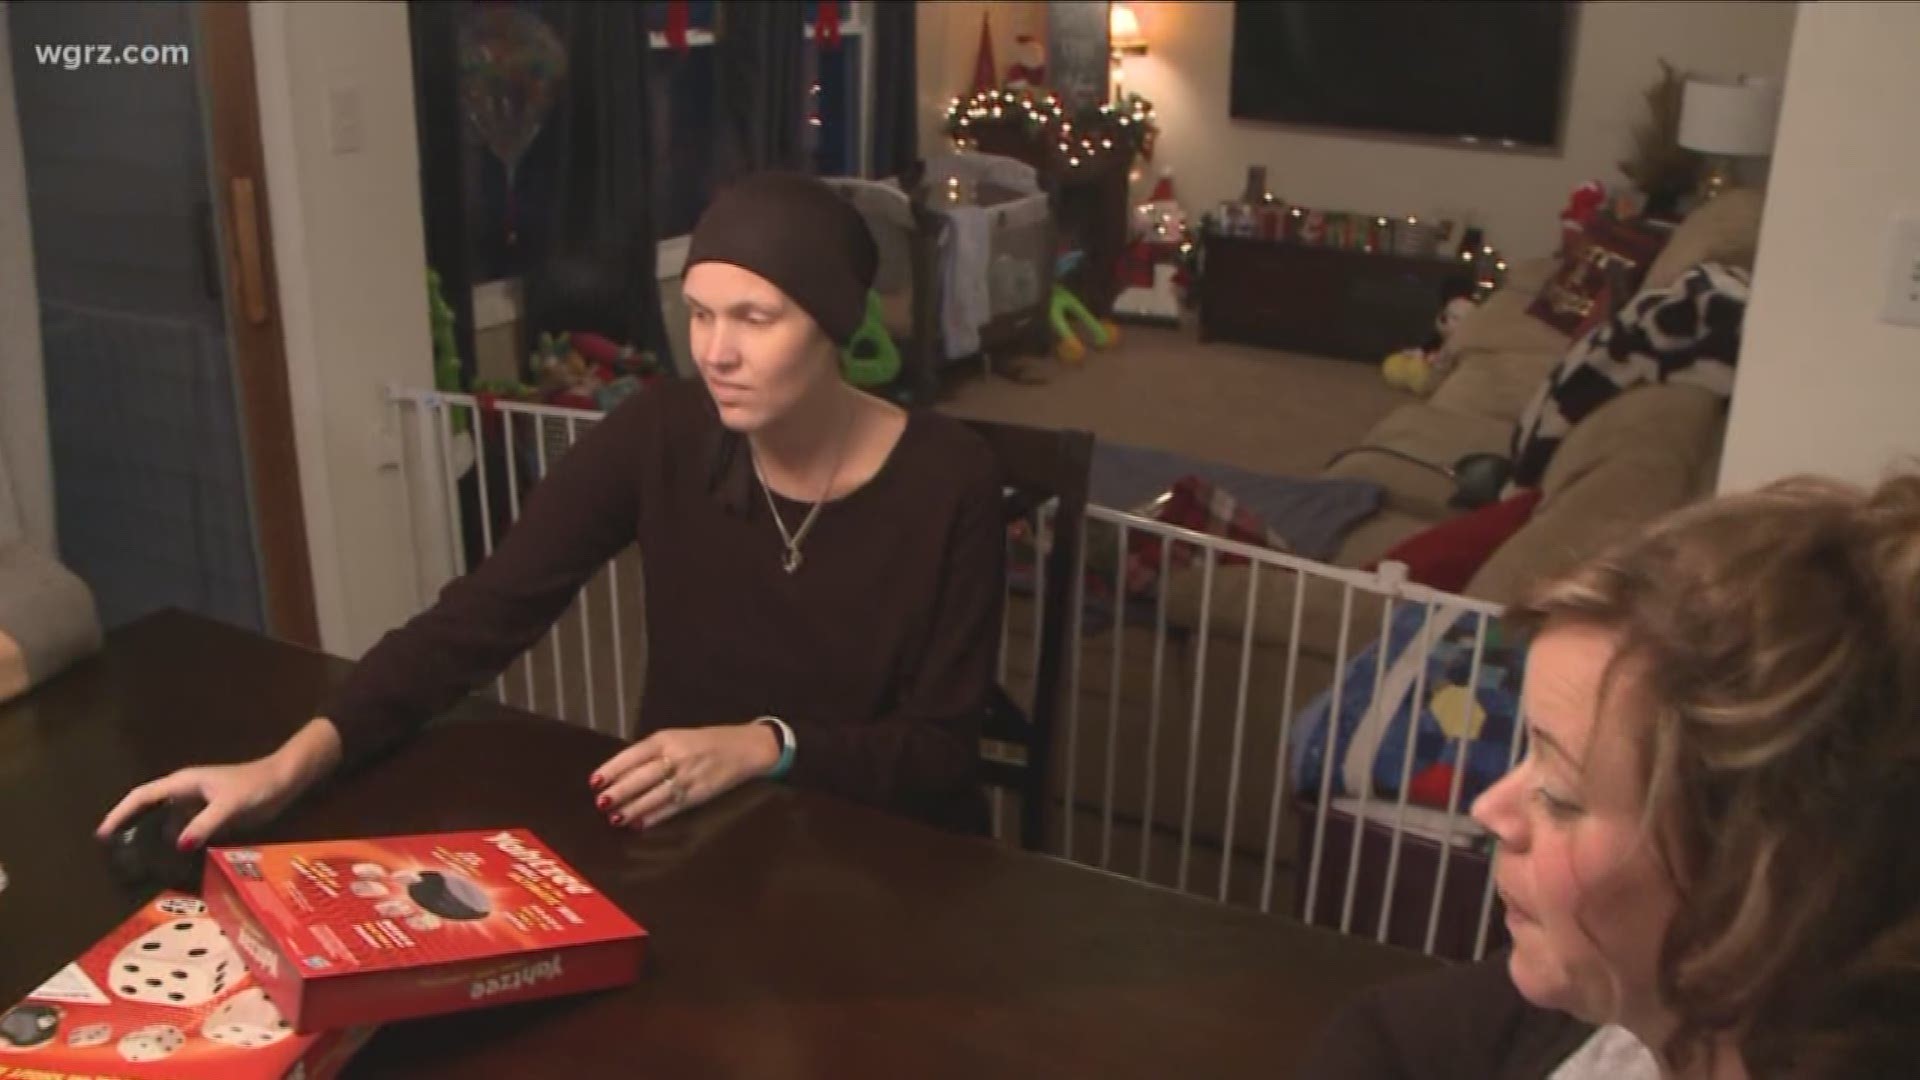 Mother battling cancer get wish for family sleepover